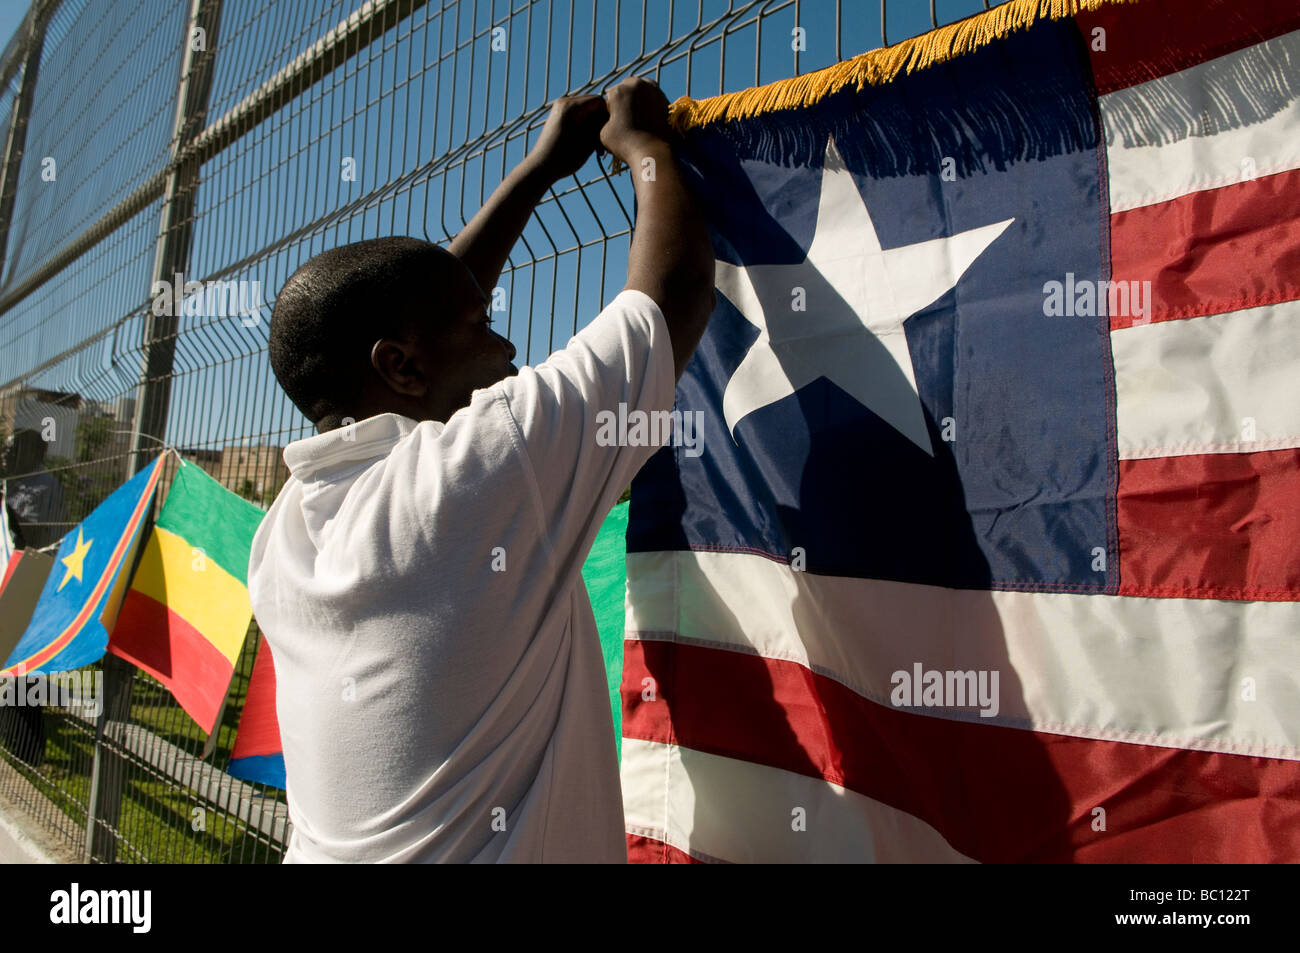 An African man hangs the flag of Liberia during UNHCR Refugee day event in Tel Aviv Israel Stock Photo